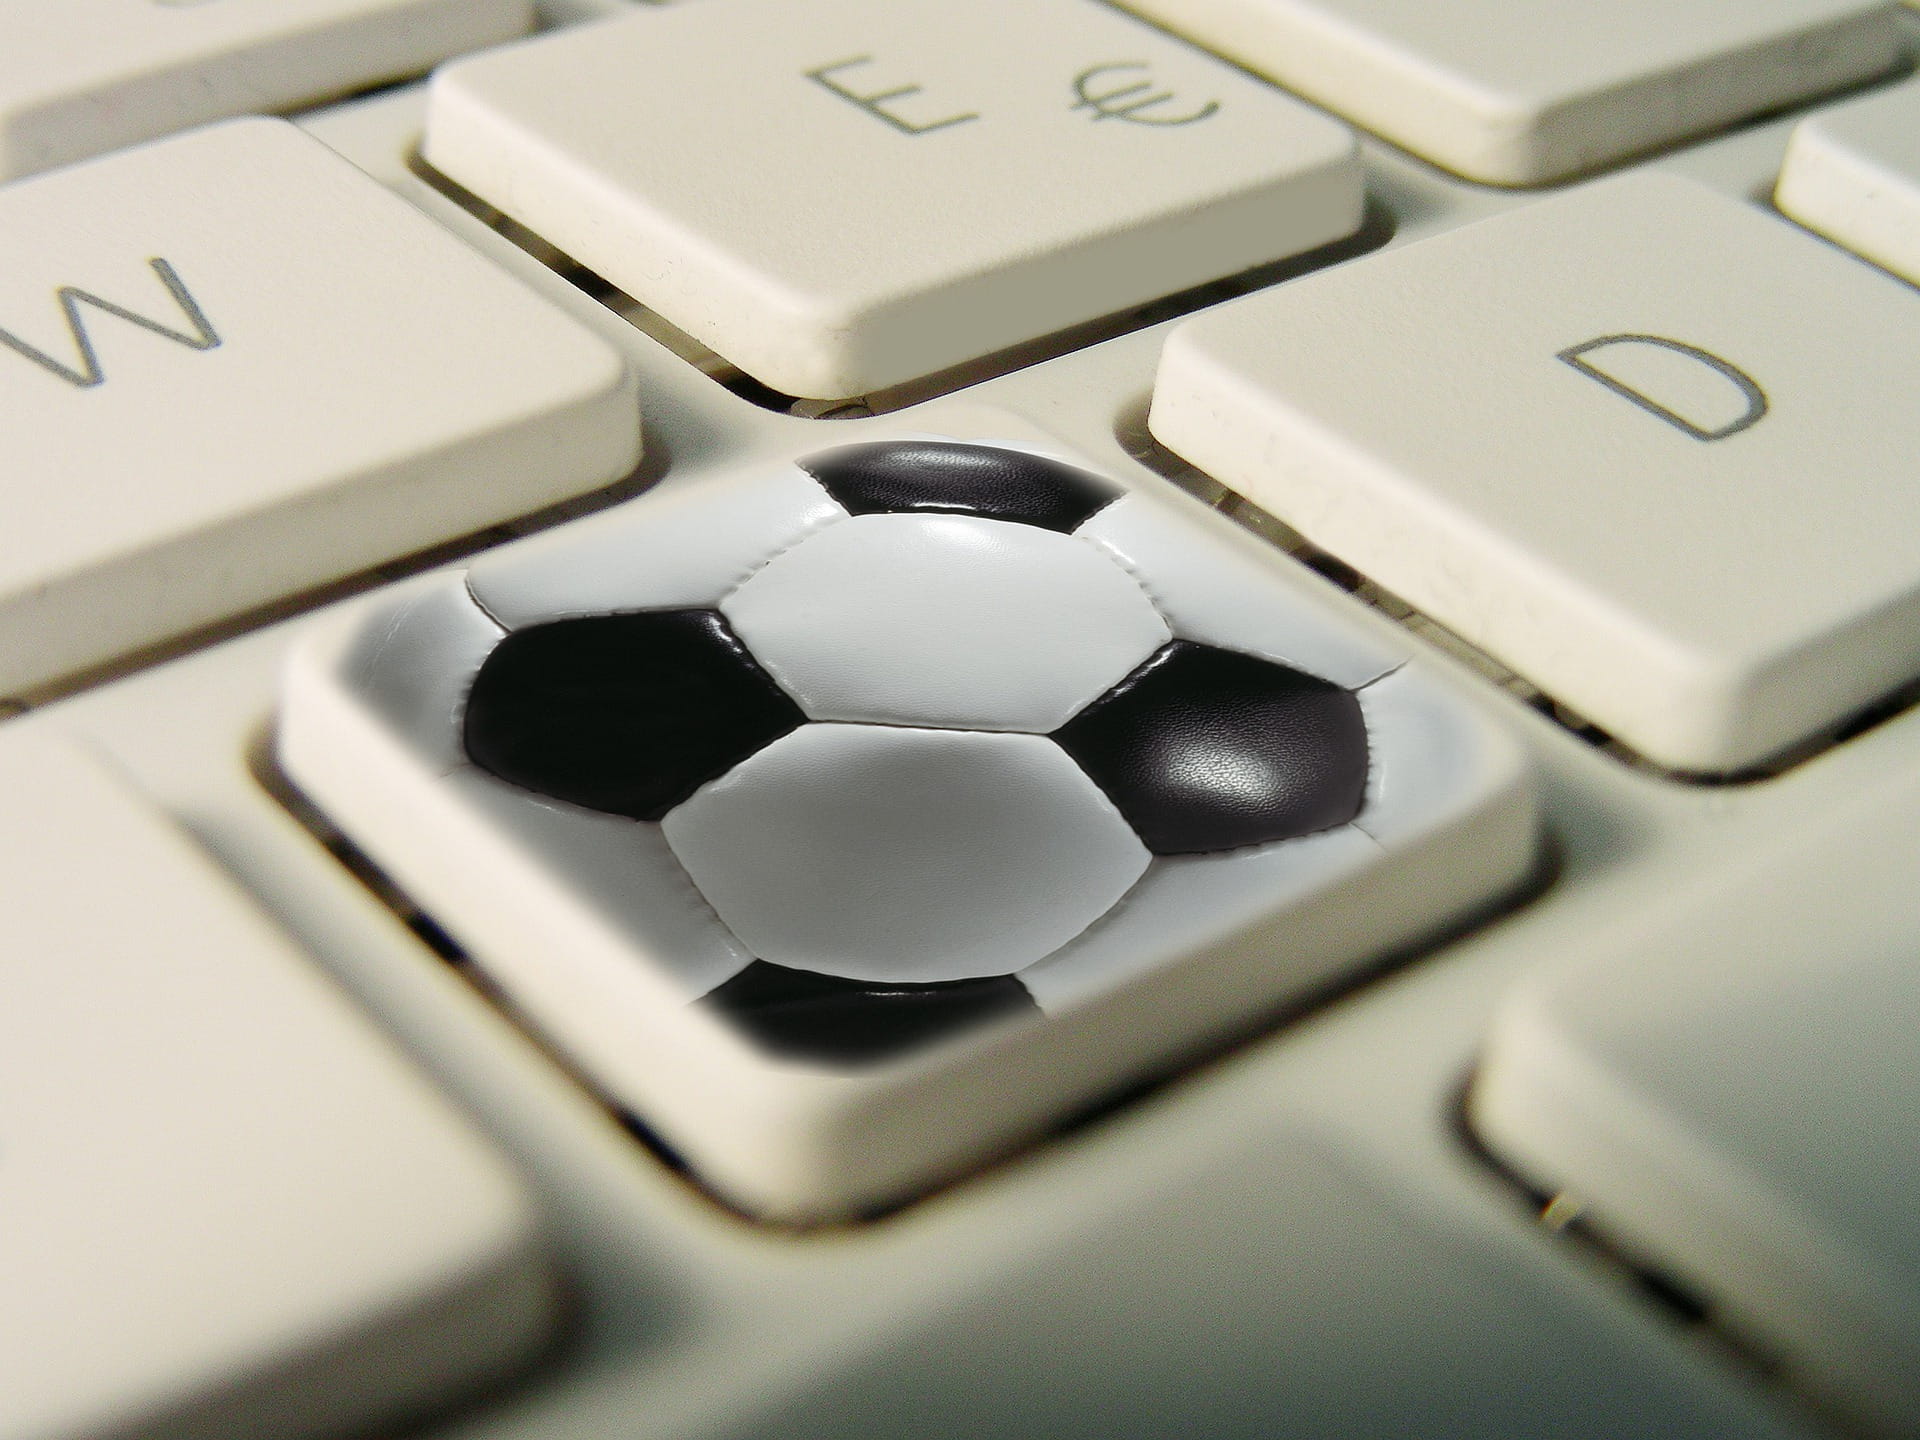 A picture of a keyboard with a football icon on it to depict a fantasy football competition.